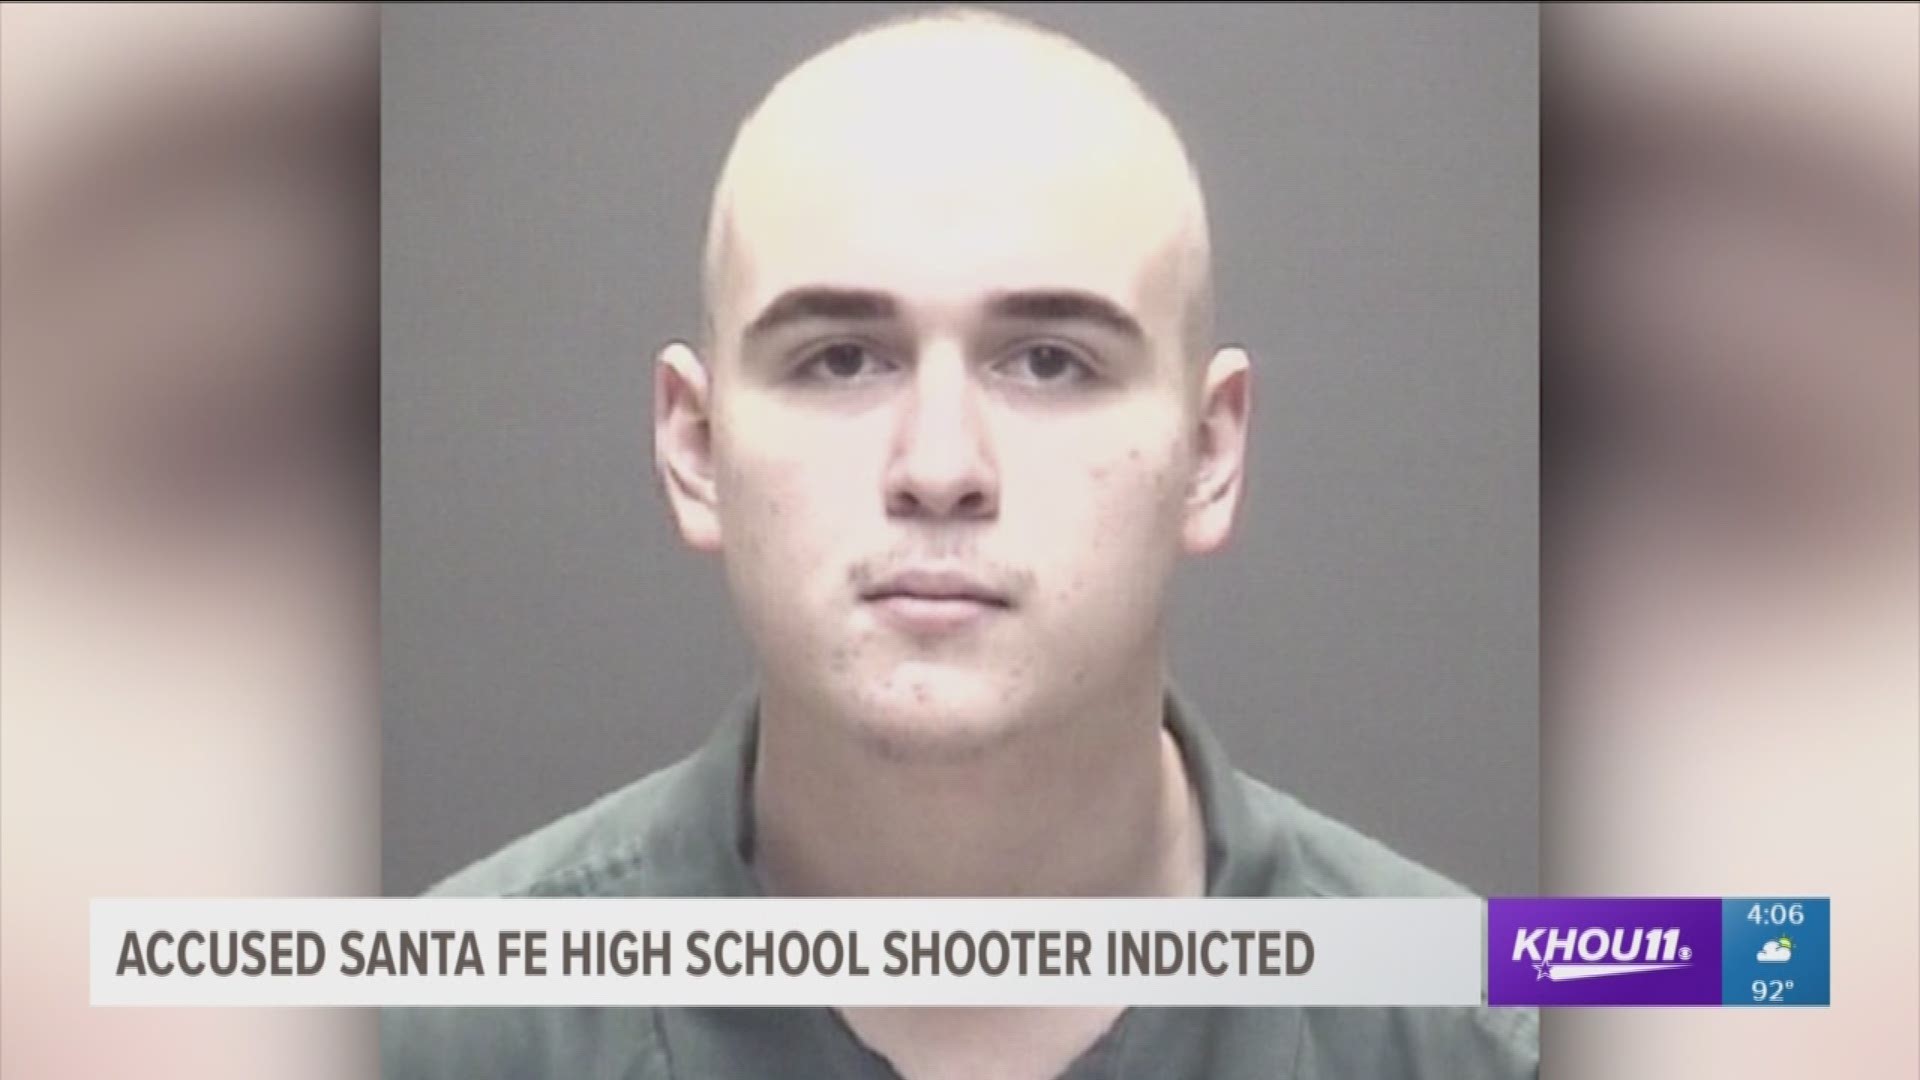 A grand jury has indicted the teenager accused of opening fire at Santa Fe High School and killing ten people and injuring 13 others.